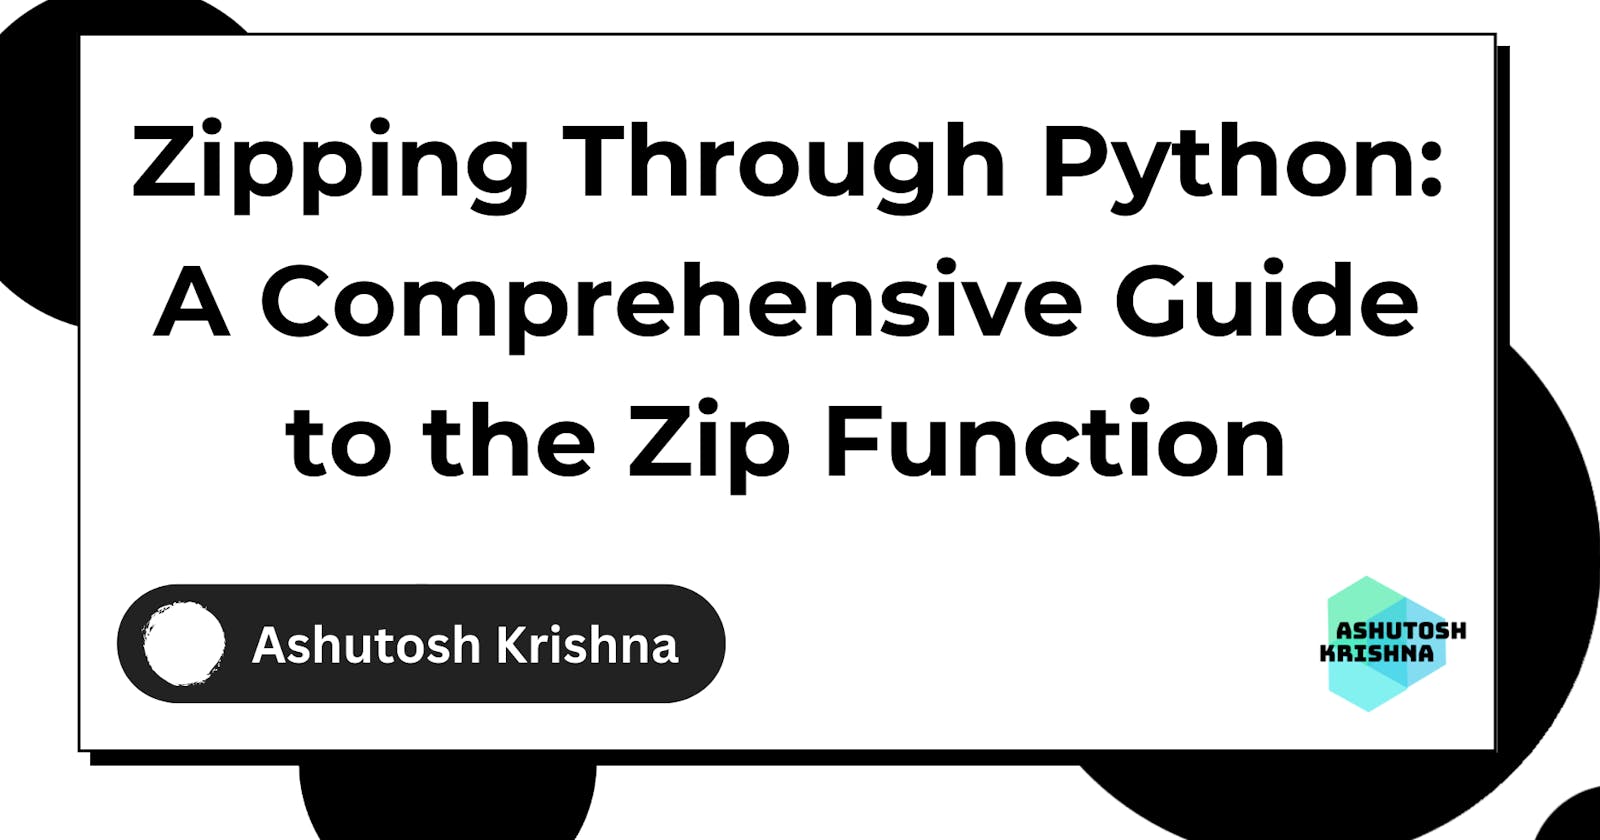 Zipping Through Python: A Comprehensive Guide to the Zip Function